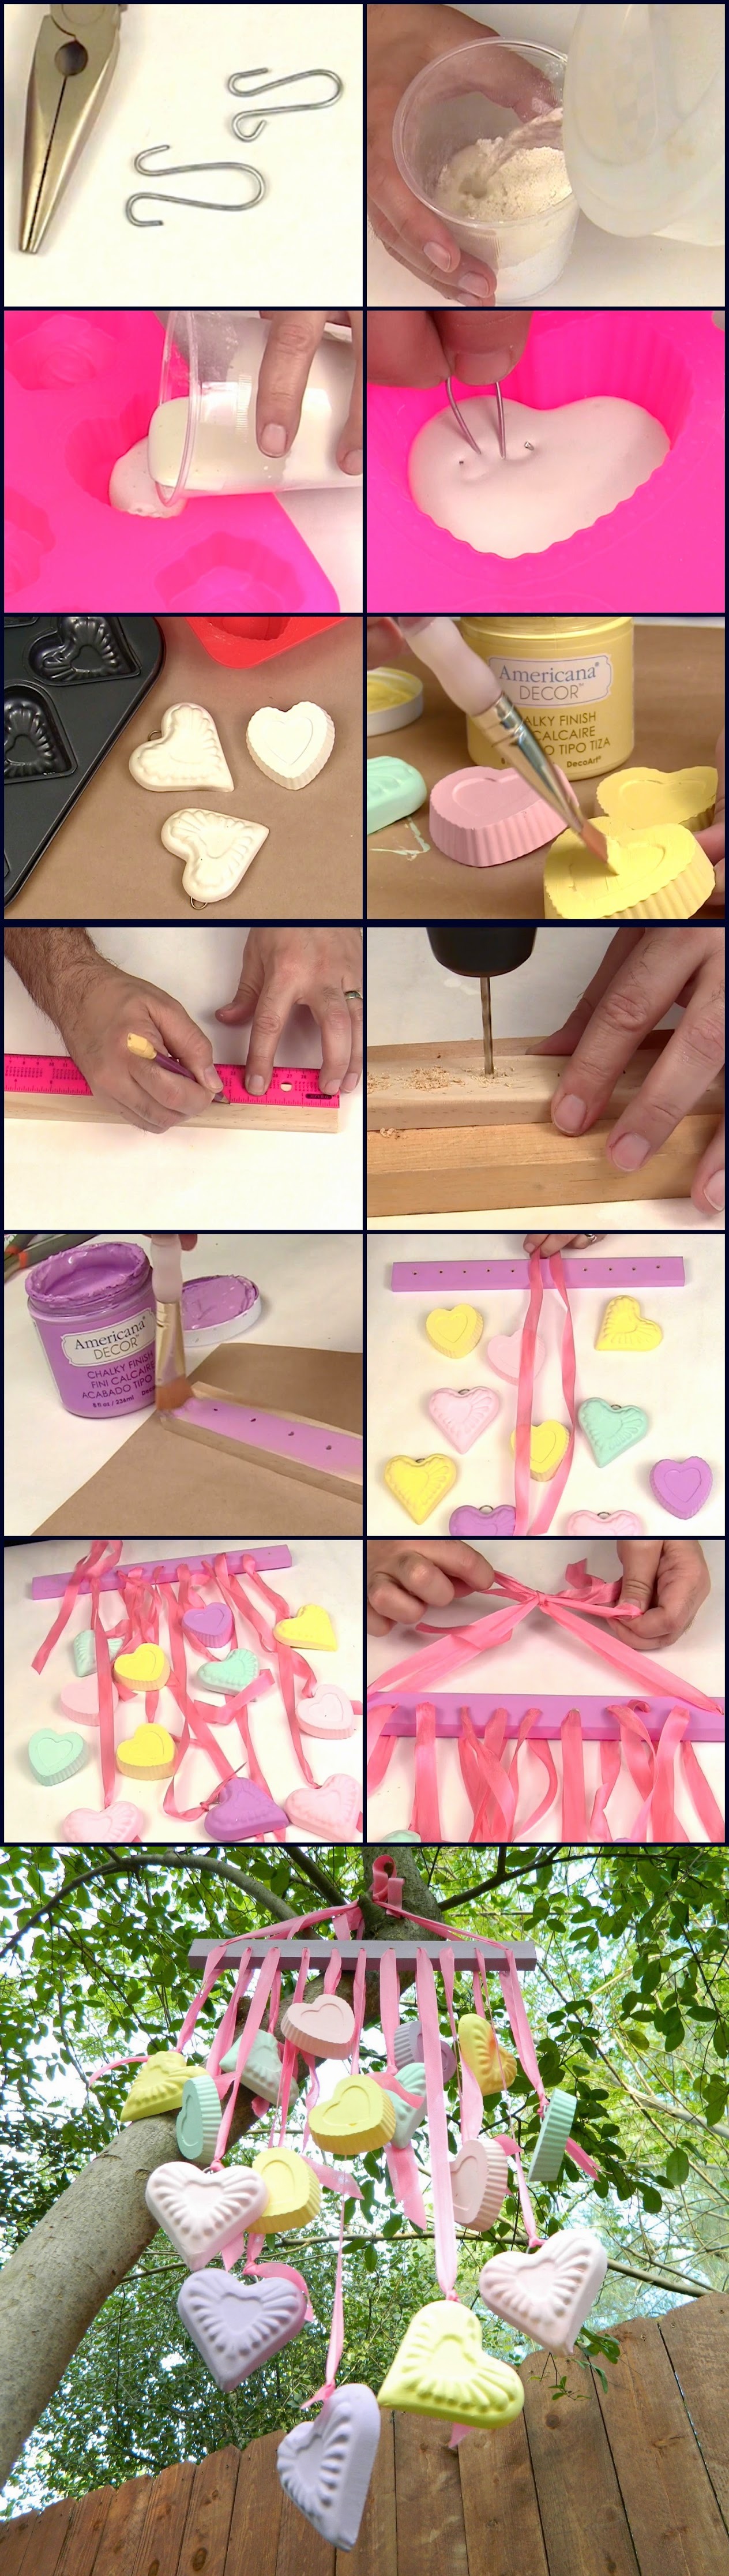 Candy Hearts Wind Chime Tutorial